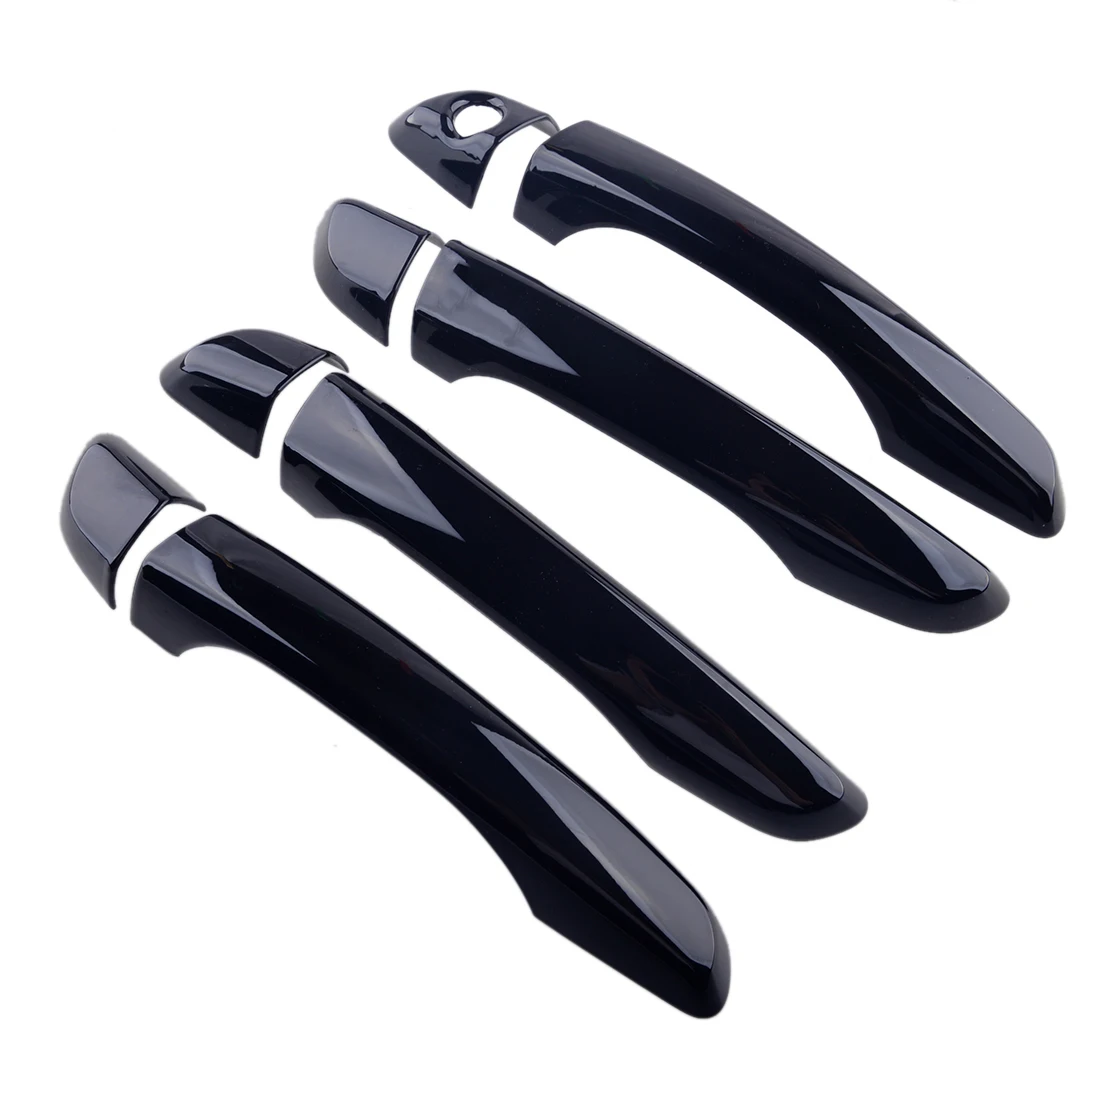 8Pcs/Set Car Glossy Black Outer Door Handle Cover Trim Without Smart Hole ABS Fit For Hyundai Elantra 2017 2018 2019 2020